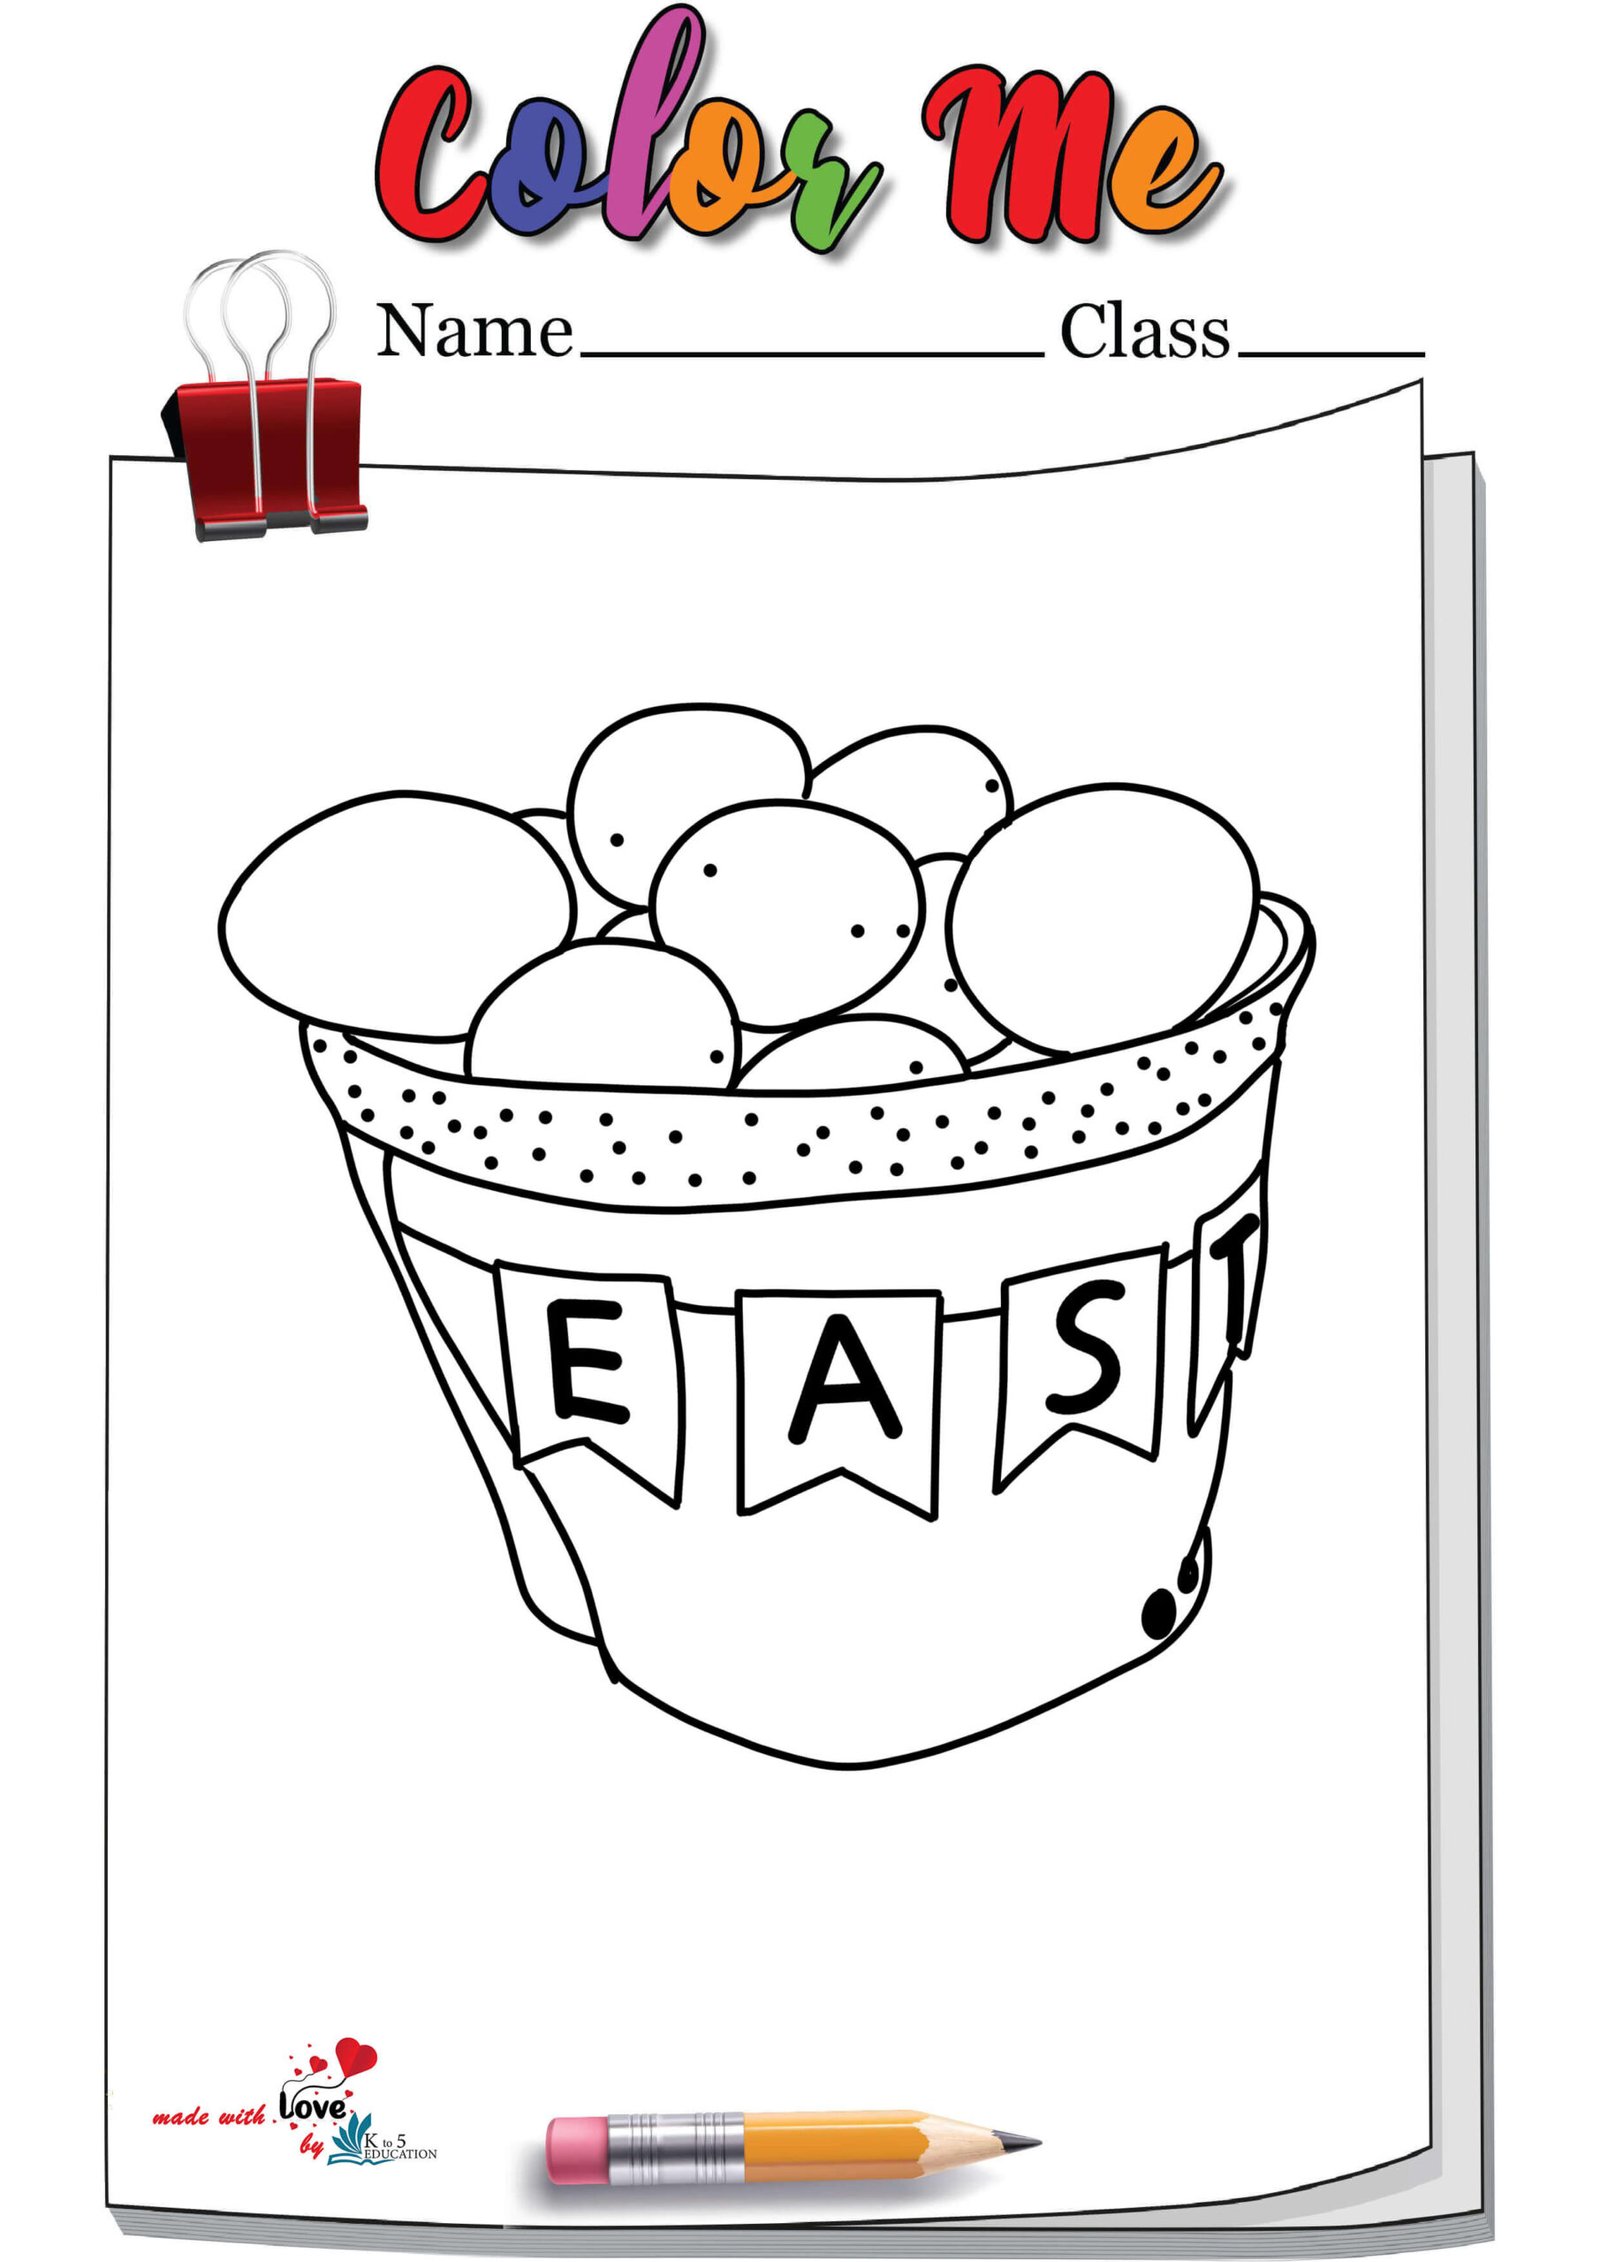 Stylish Easter Egg Coloring Page